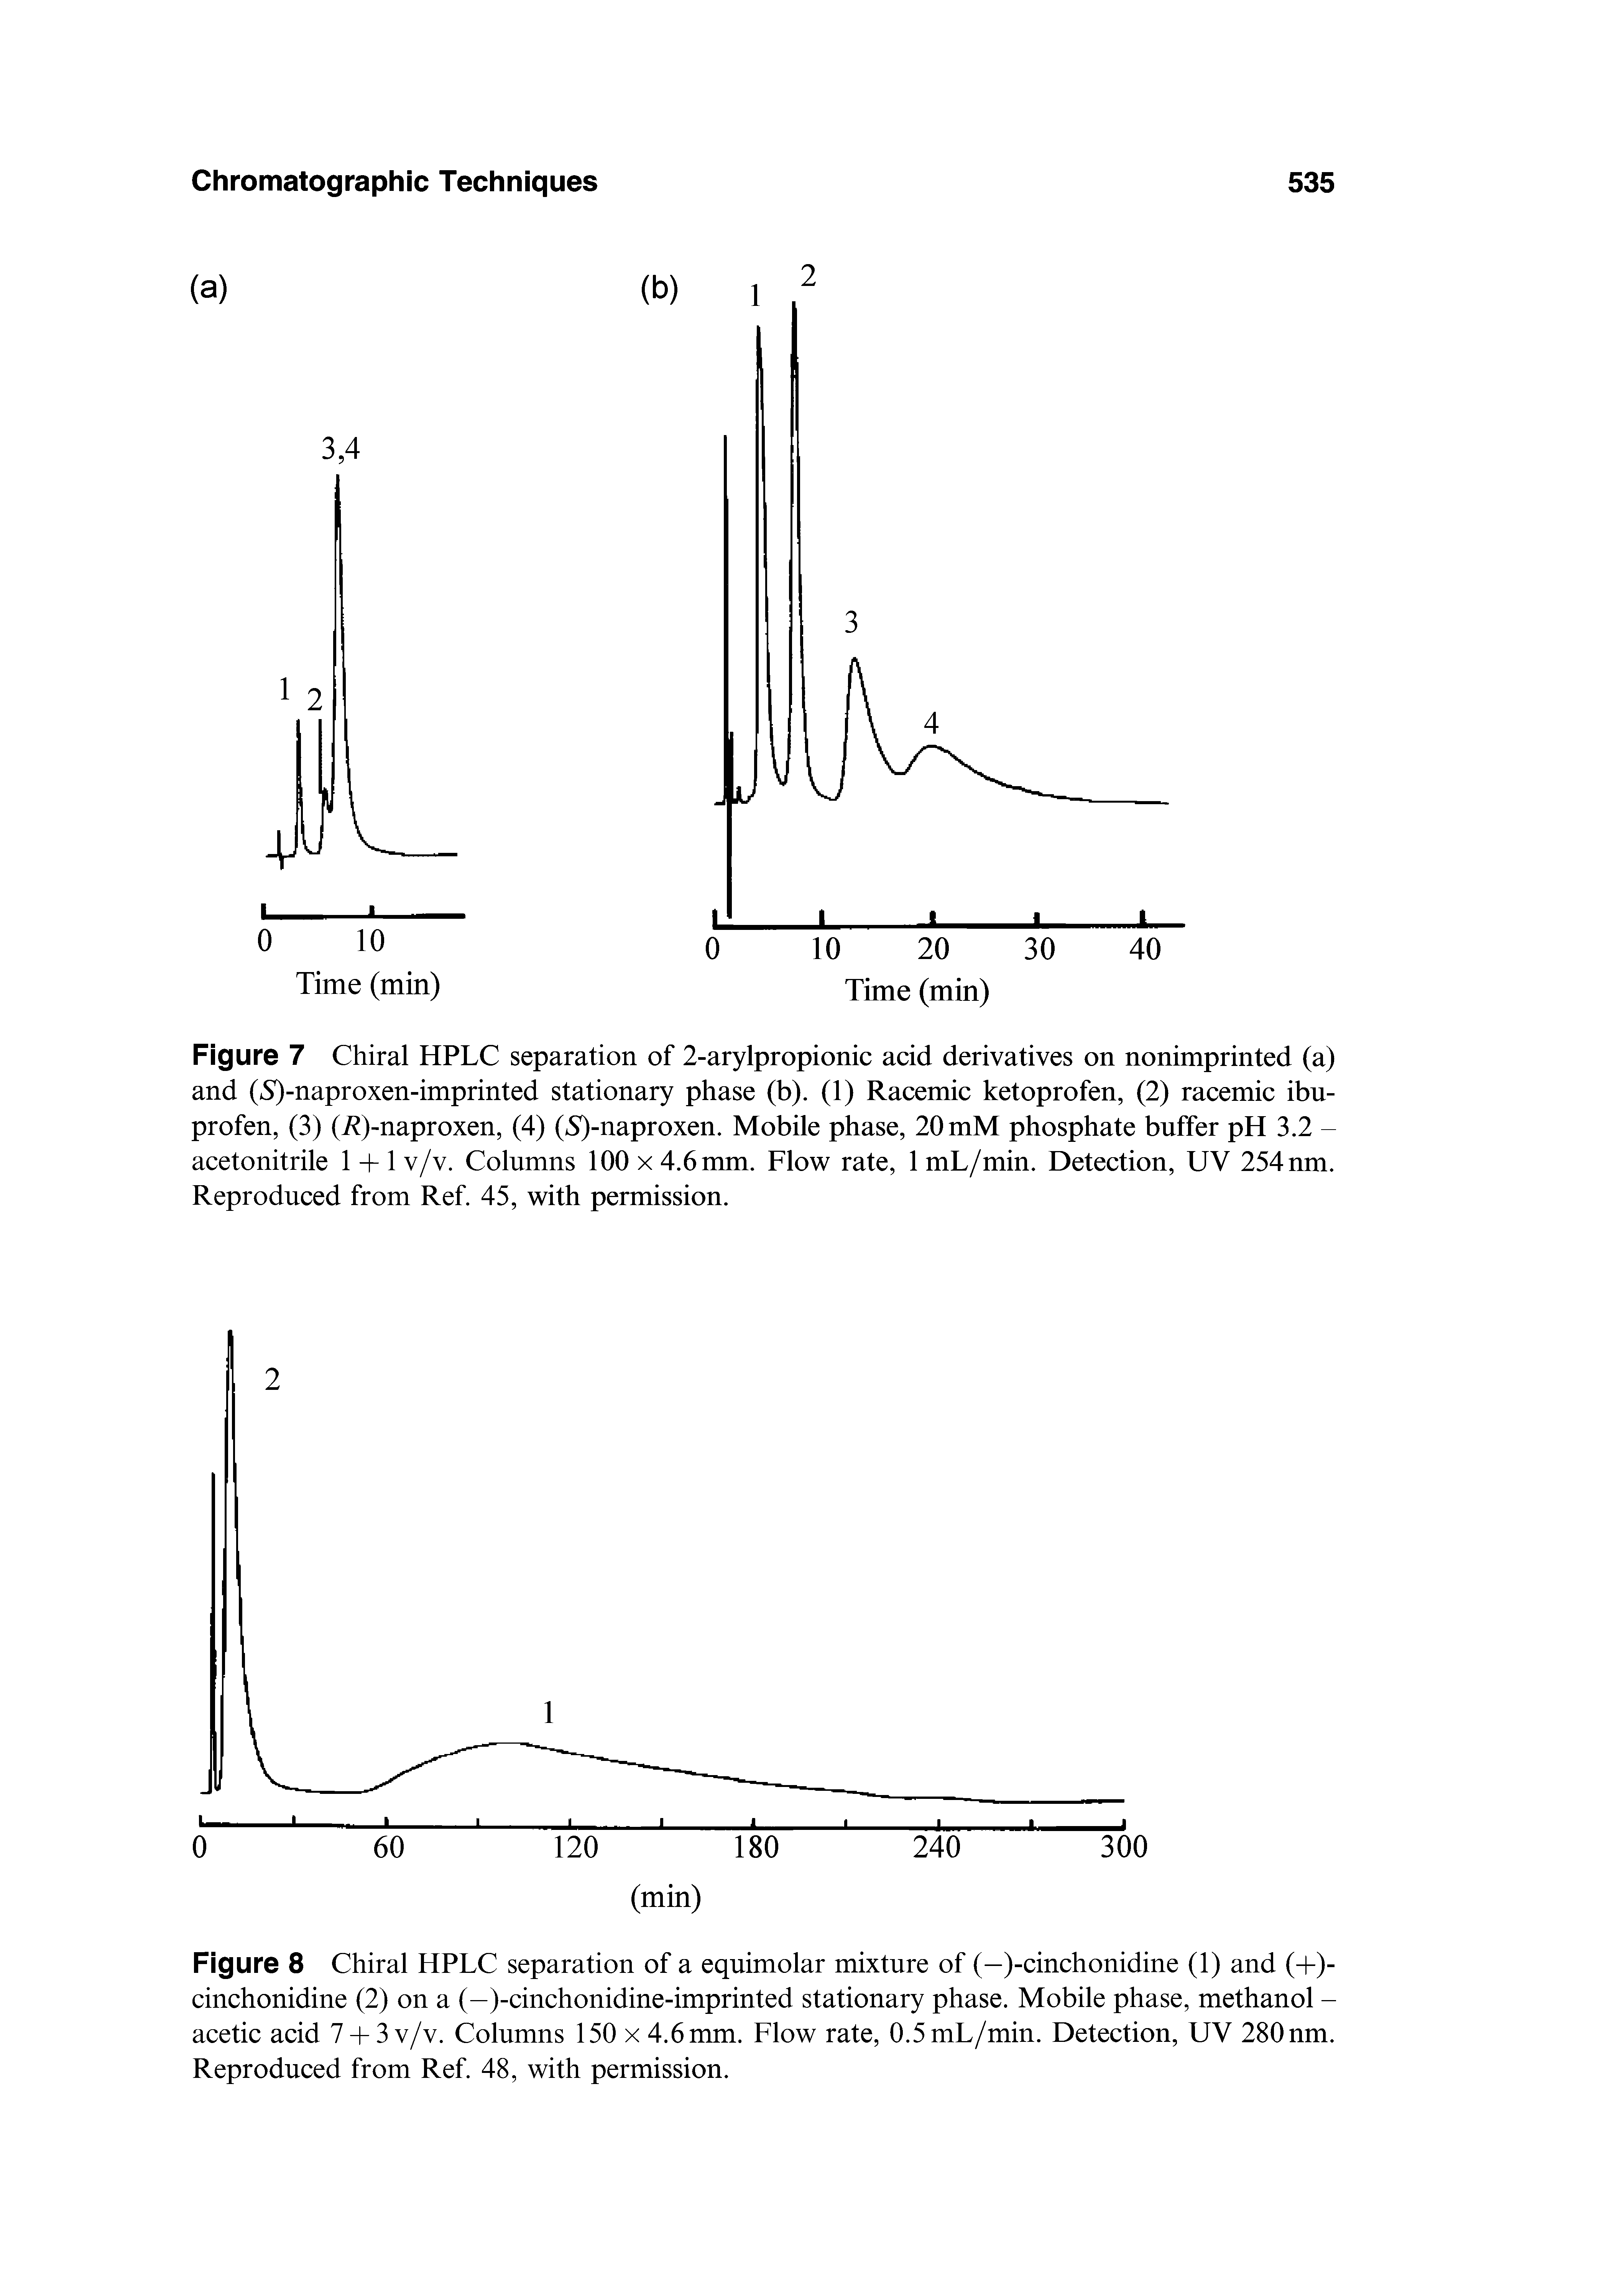 Figure 8 Chiral HPLC separation of a equimolar mixture of (-)-cinchonidine (1) and (+)-cinchonidine (2) on a (—)-cinchonidine-imprinted stationary phase. Mobile phase, methanol -acetic acid 7 + 3 v/v. Columns 150 x 4.6 mm. Flow rate, 0.5mL/min. Detection, UV 280 nm. Reproduced from Ref. 48, with permission.